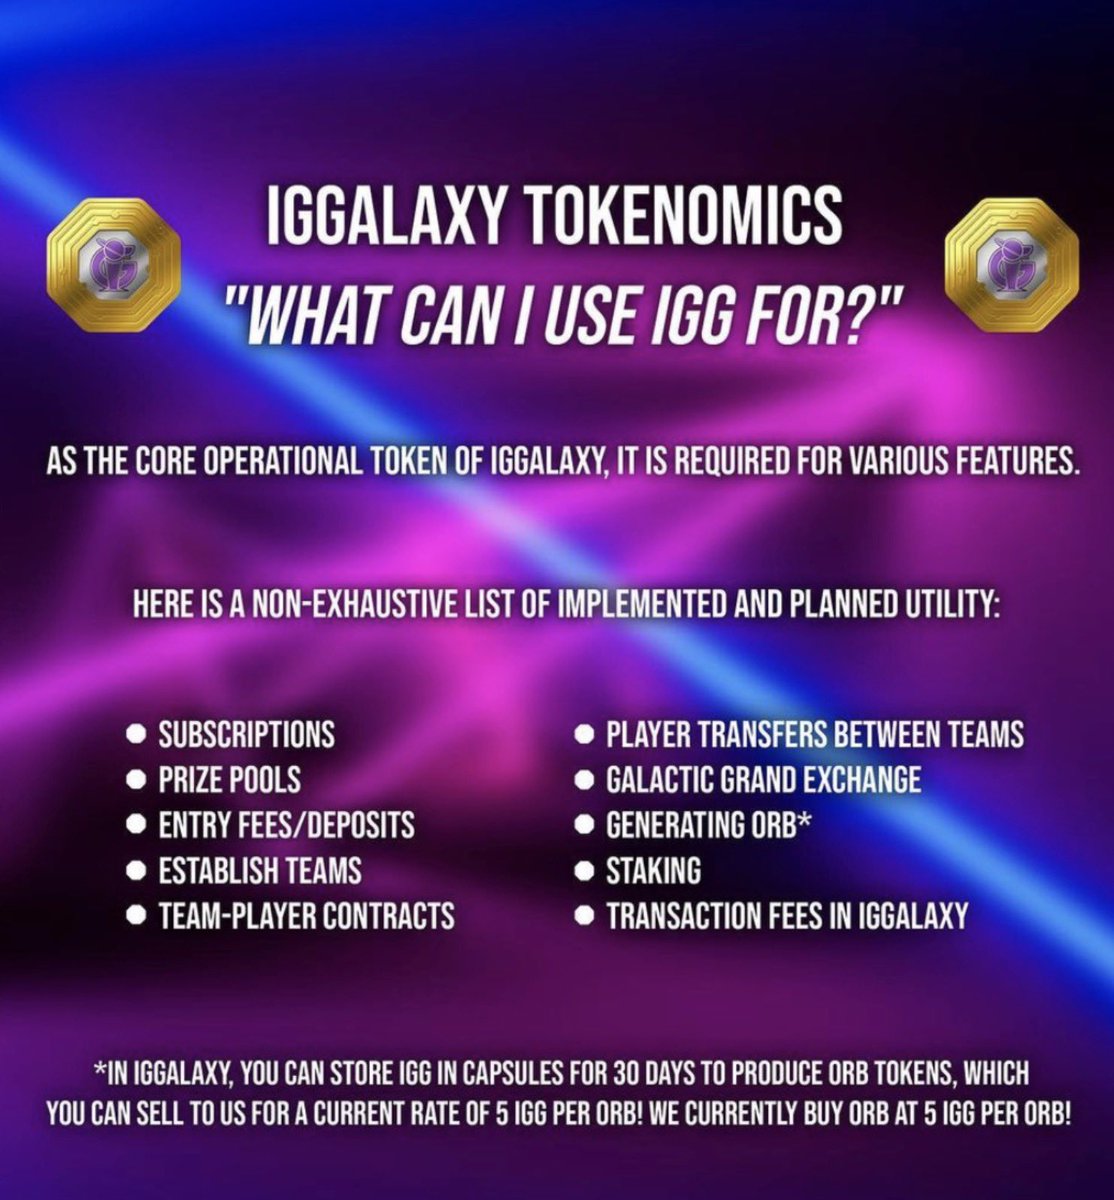 𝗜𝗚 𝗚𝗼𝗹𝗱, 𝗜𝗚𝗚 𝗧𝗼𝗸𝗲𝗻 IGG is the operational token required across IGGalaxy, used to drive value exchange between market participants to form a token economy for content, social competitive gaming and esports